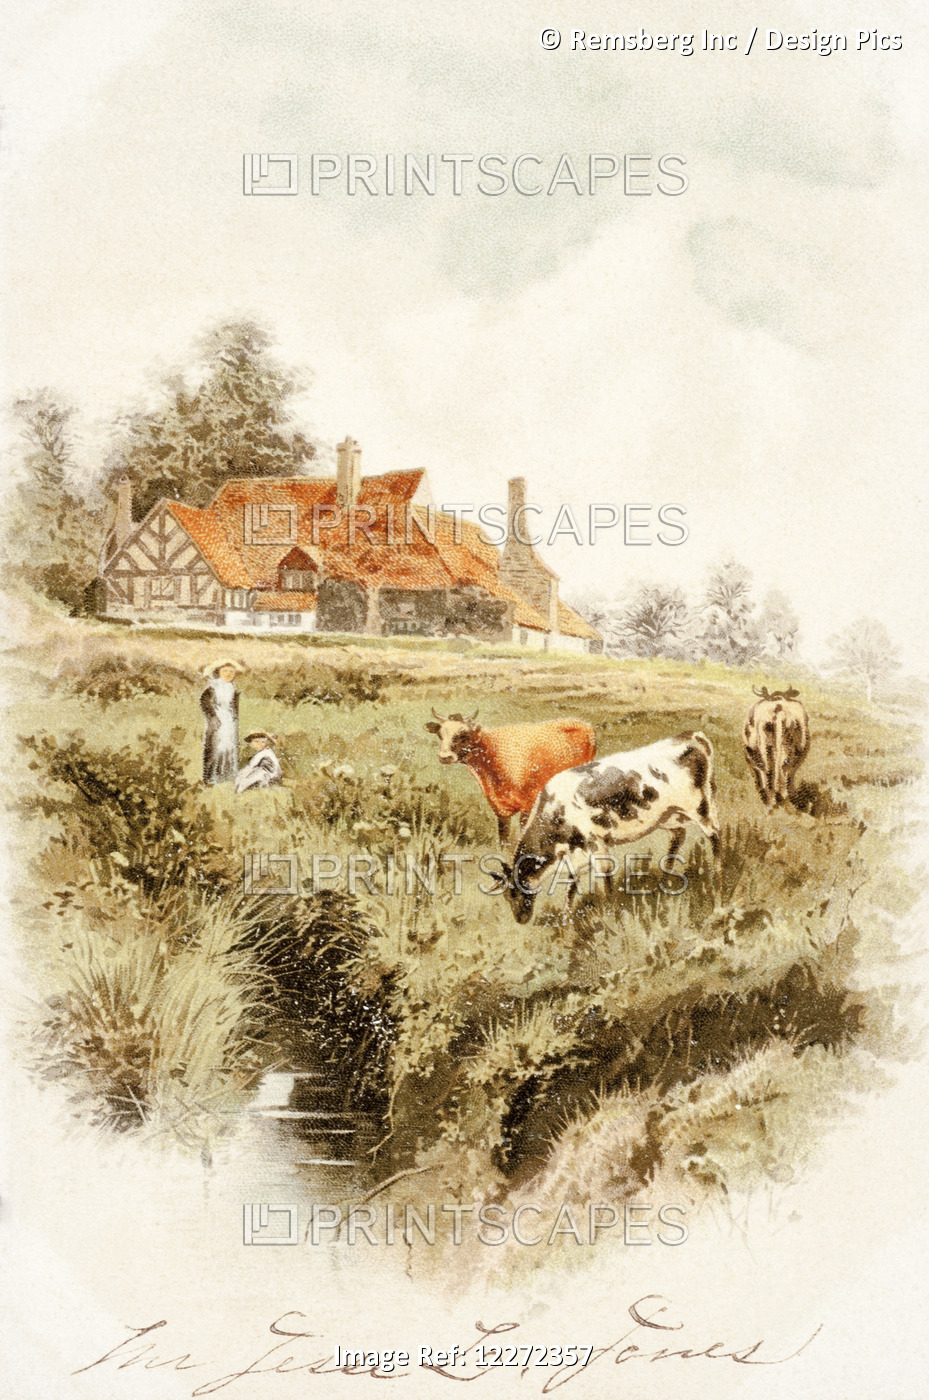 Historic Greeting Card With Illustration Of Cows And People On Farm From 19th ...